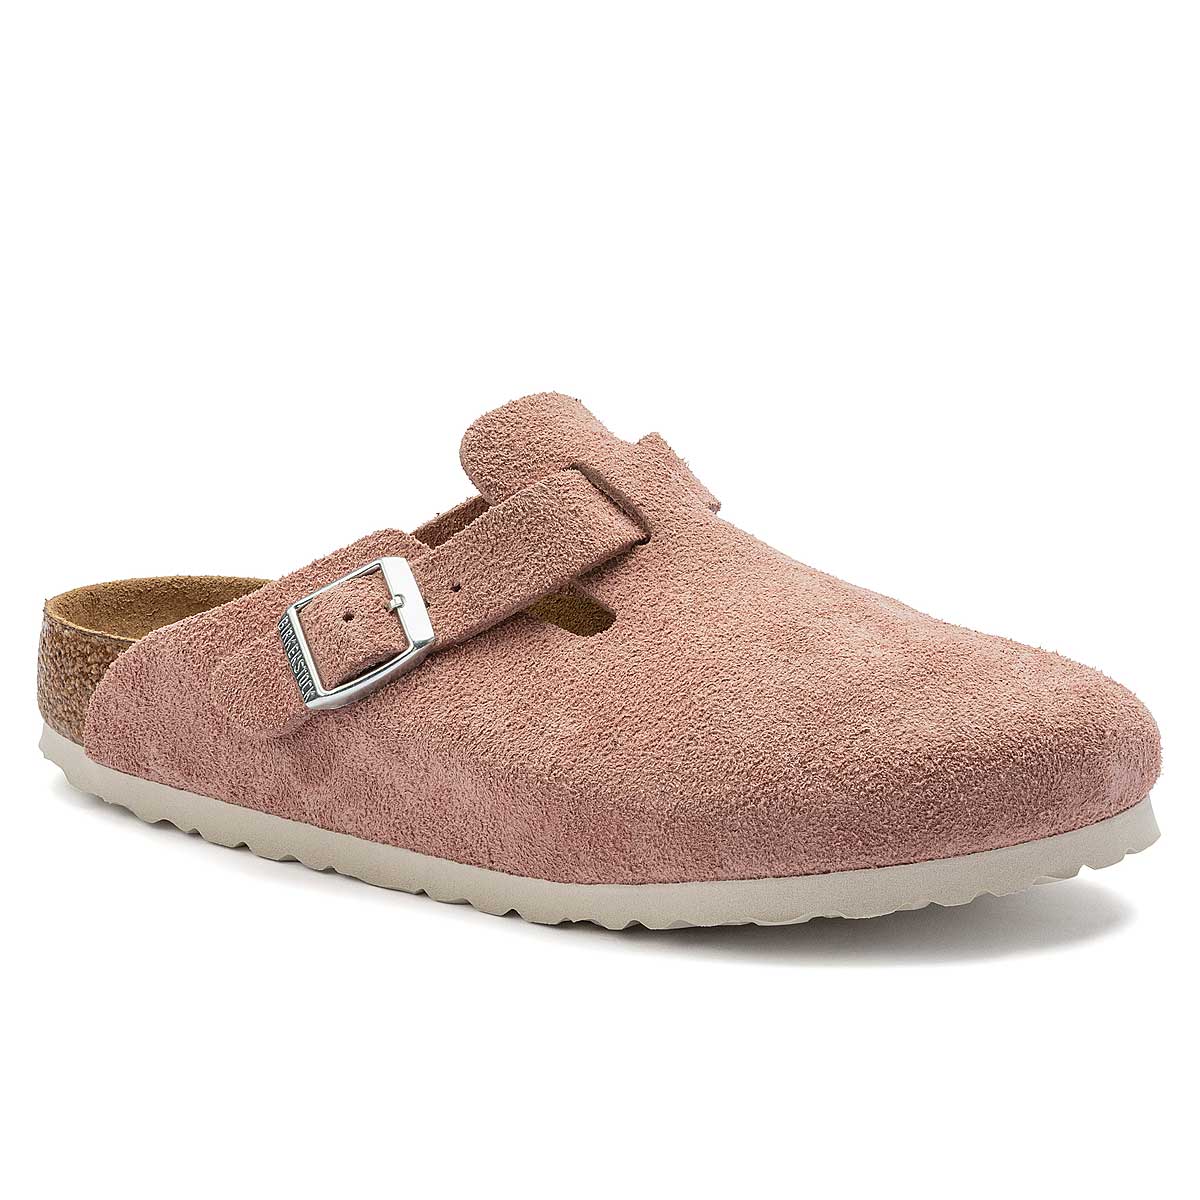 Birkenstock Boston Sfb Leve Pink Clay, Pink Clay